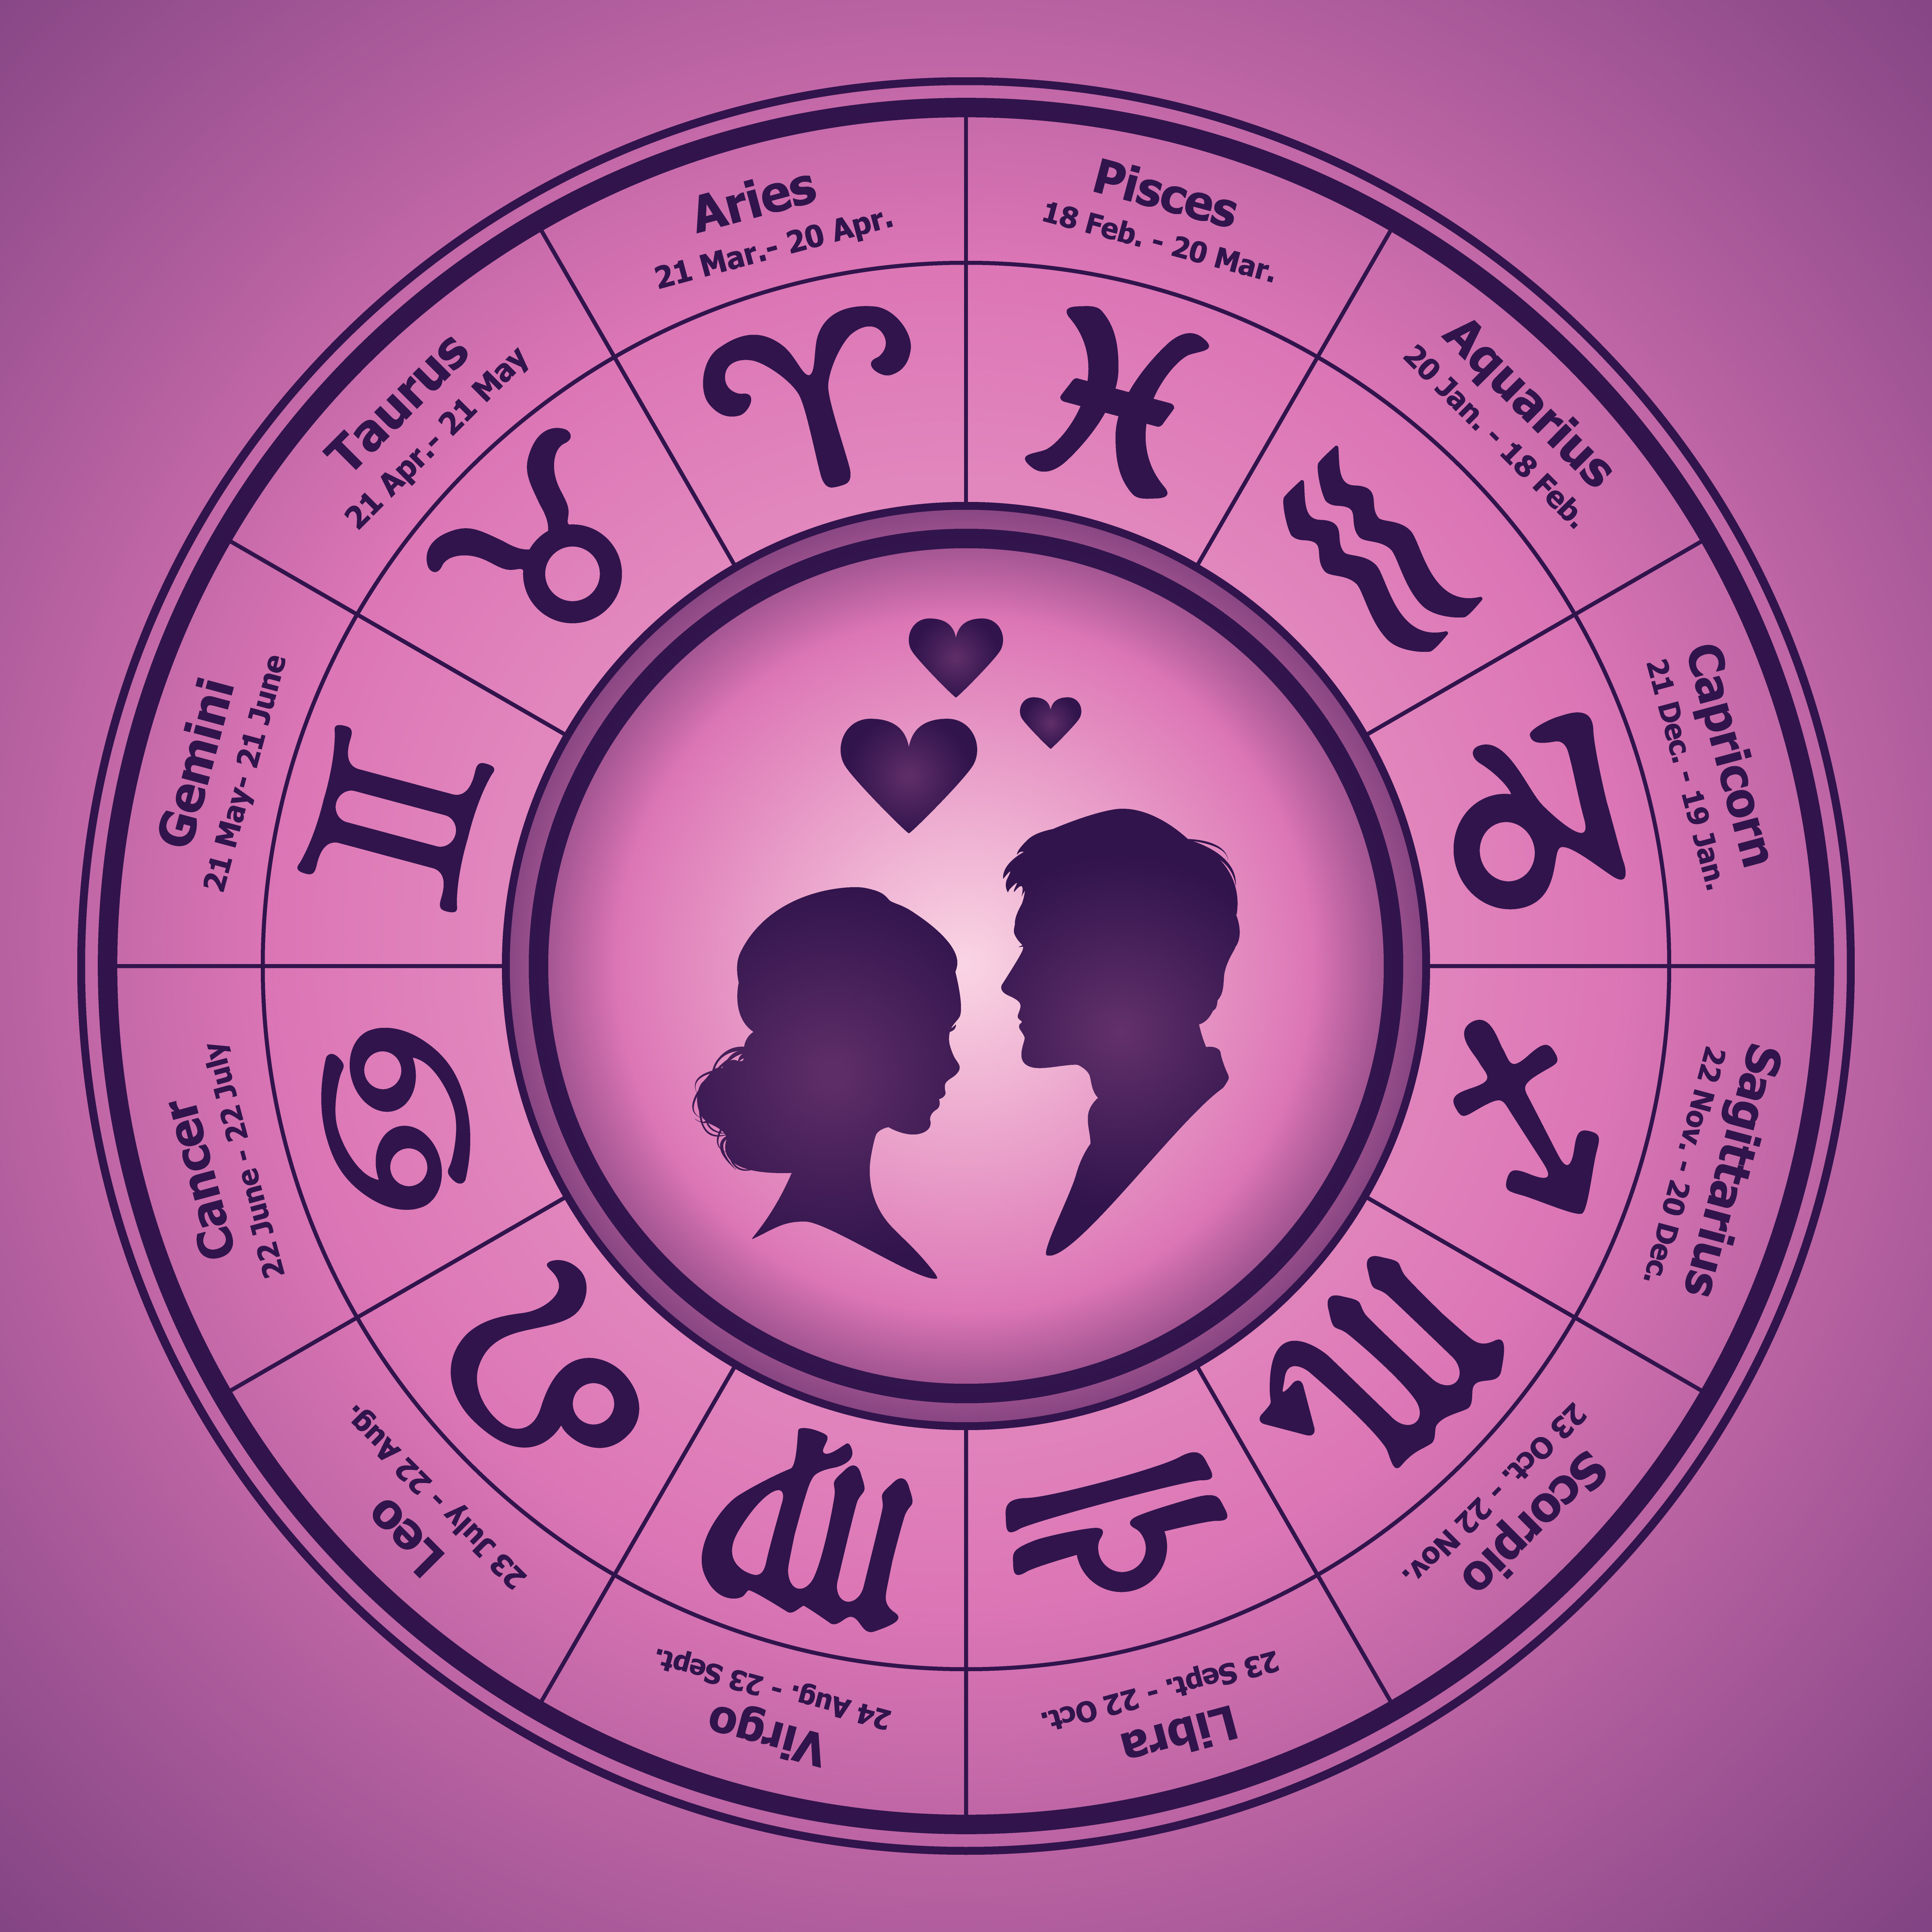 The Zodiac signs chart with an outline of a couple in the middle | Source: Shutterstock